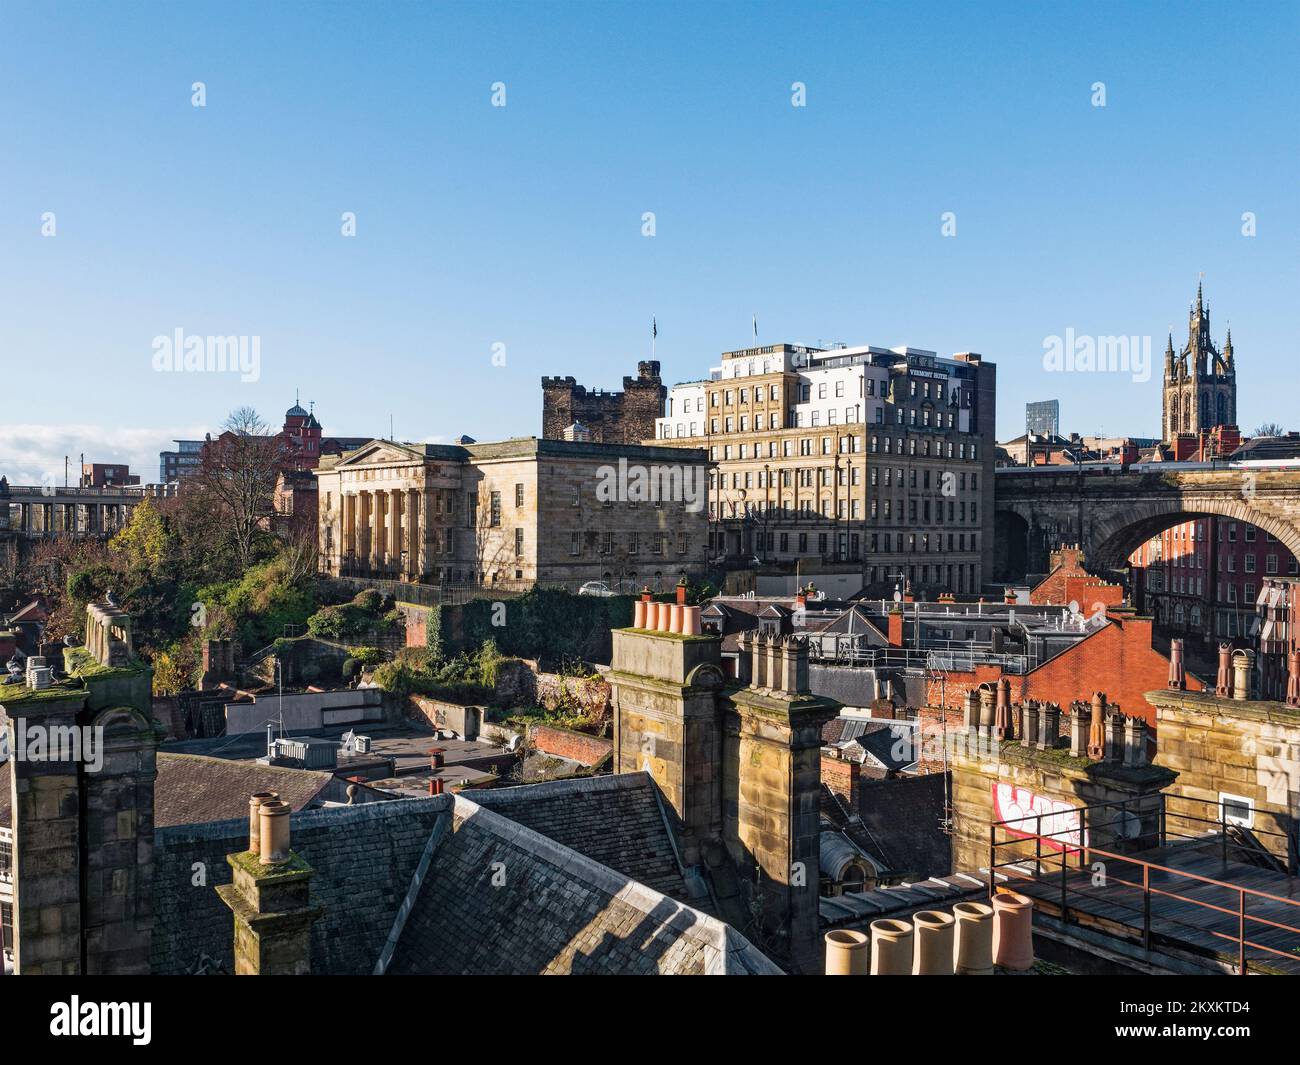 High view of Newcastle upon Tyne, UK, looking to the Vermont Hotel and St Nicholas Cathedral Stock Photo